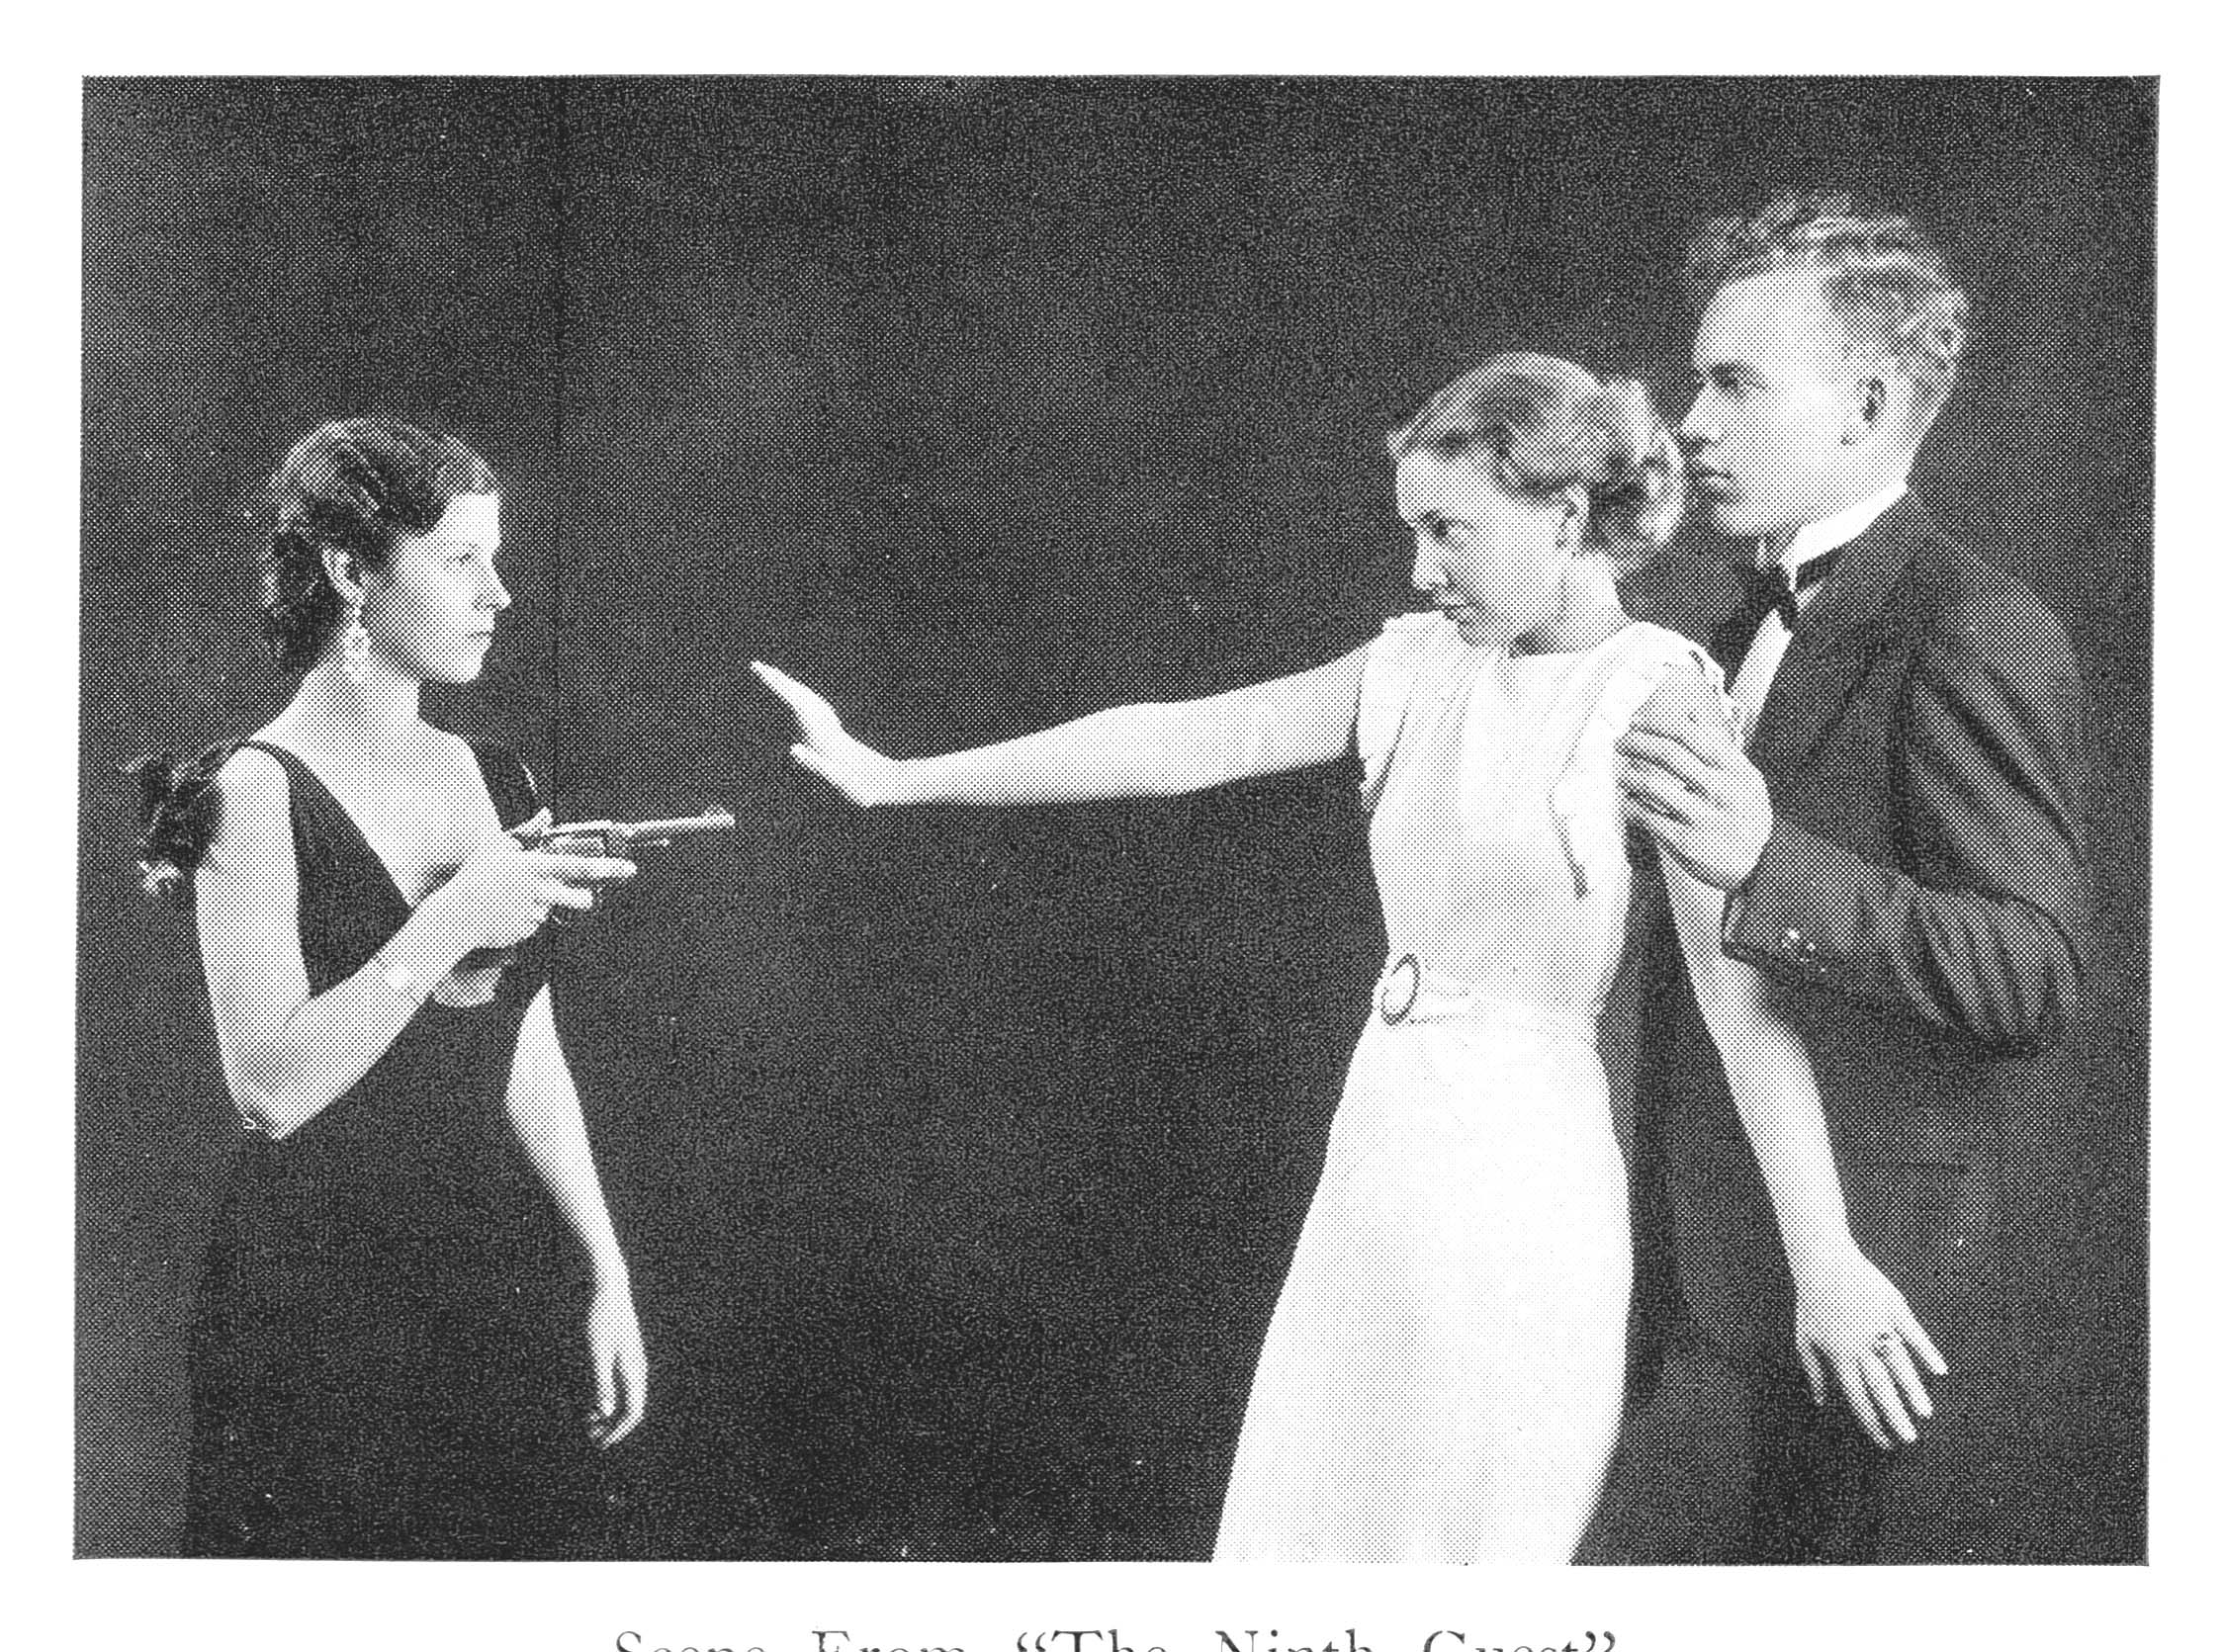 Two women and one  man act out a scene fro a play. One woman is pointing a gun at the other, while the man holds in place.